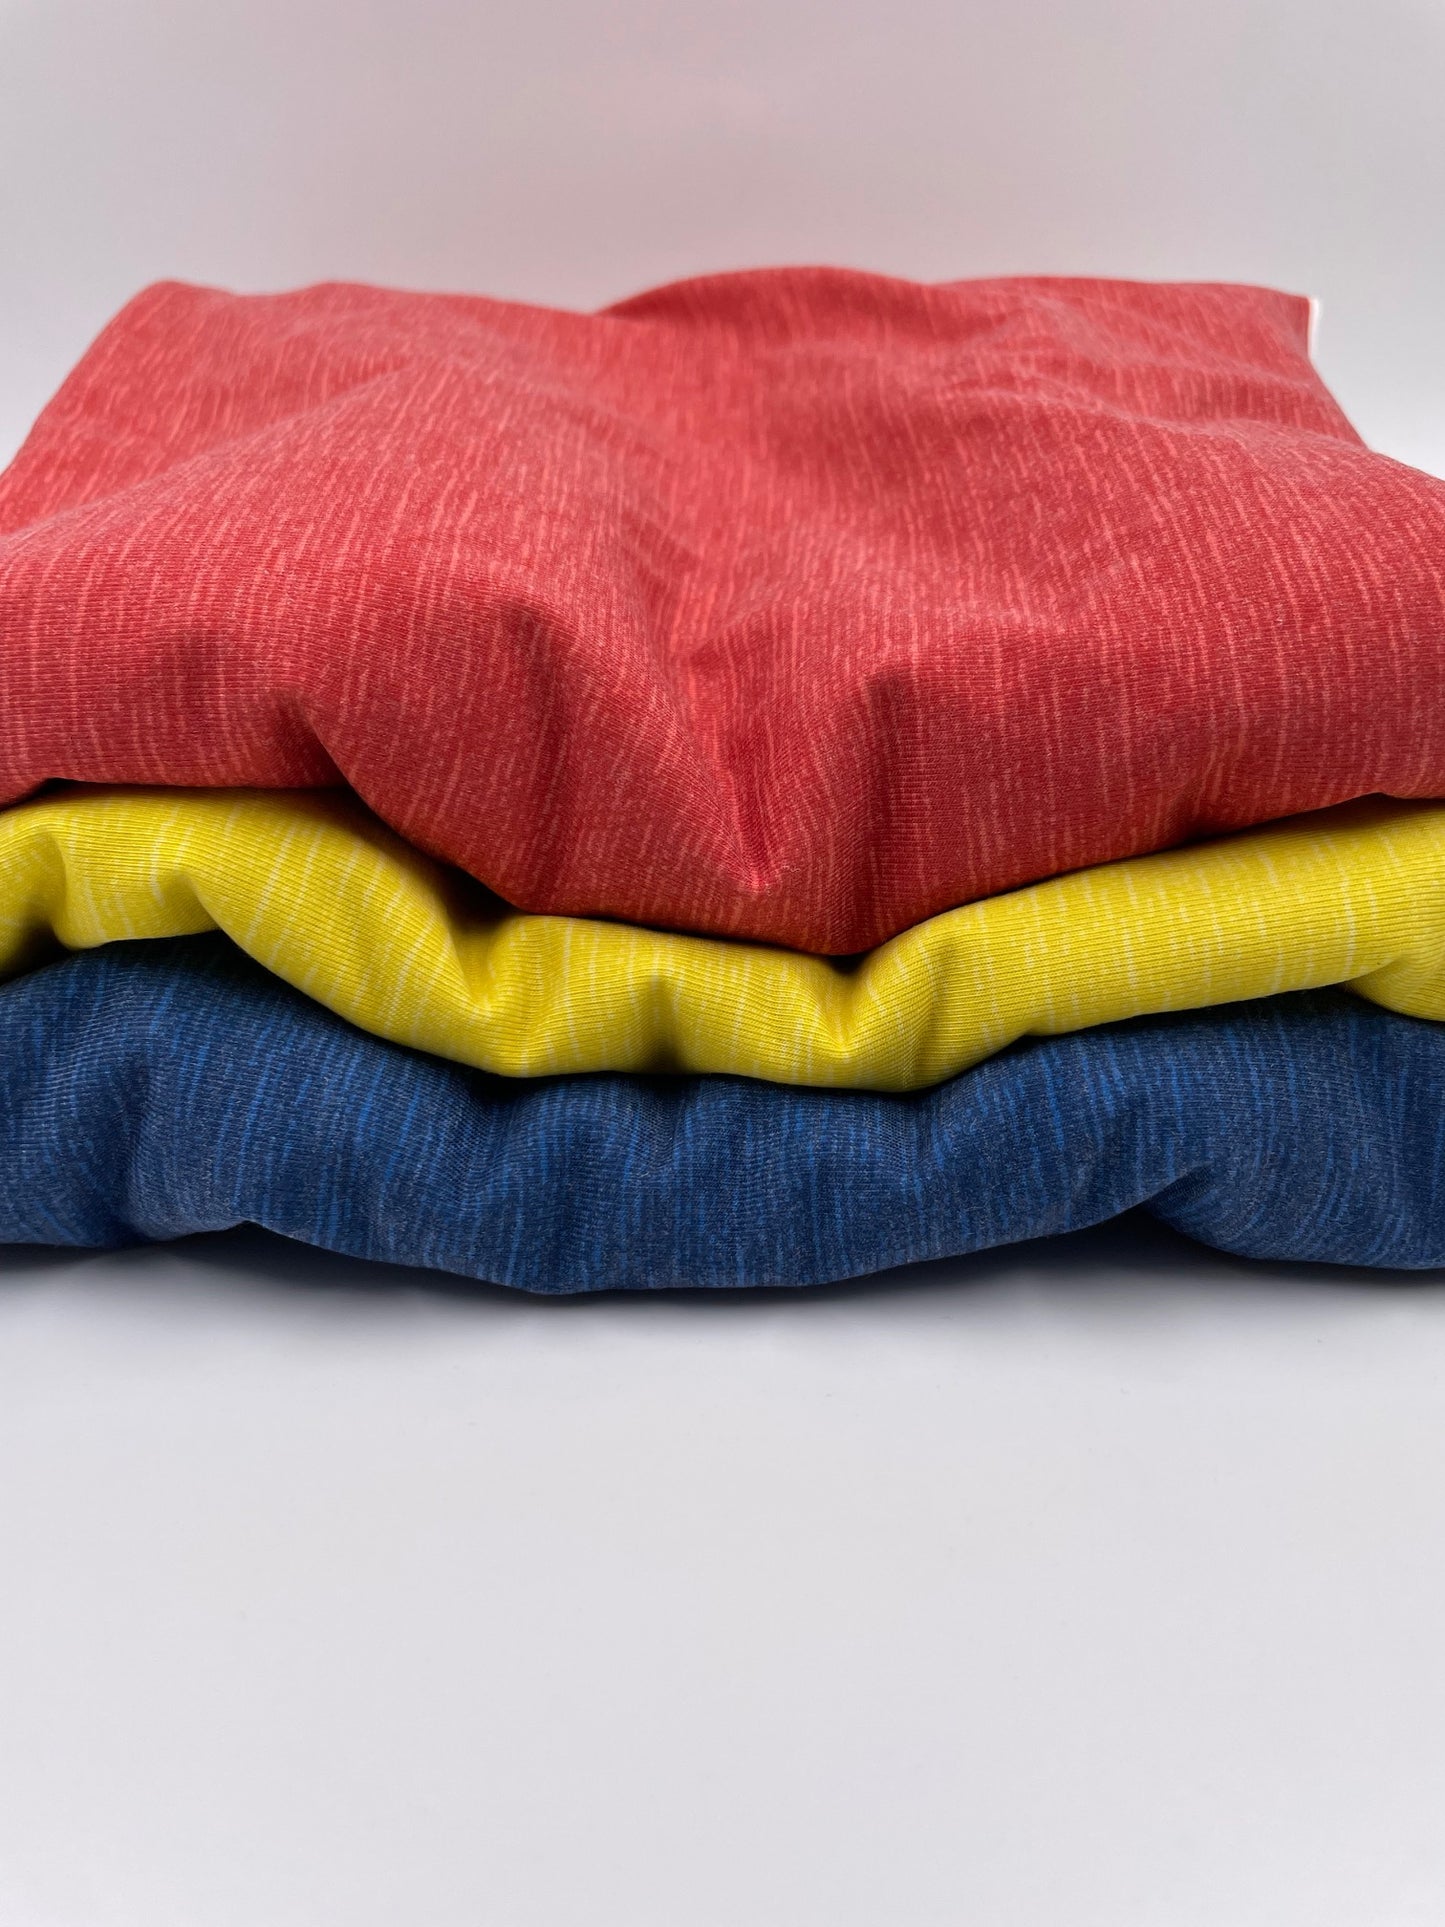 Drirelease: Marine Blue, Coral and Yellow Woven Textures